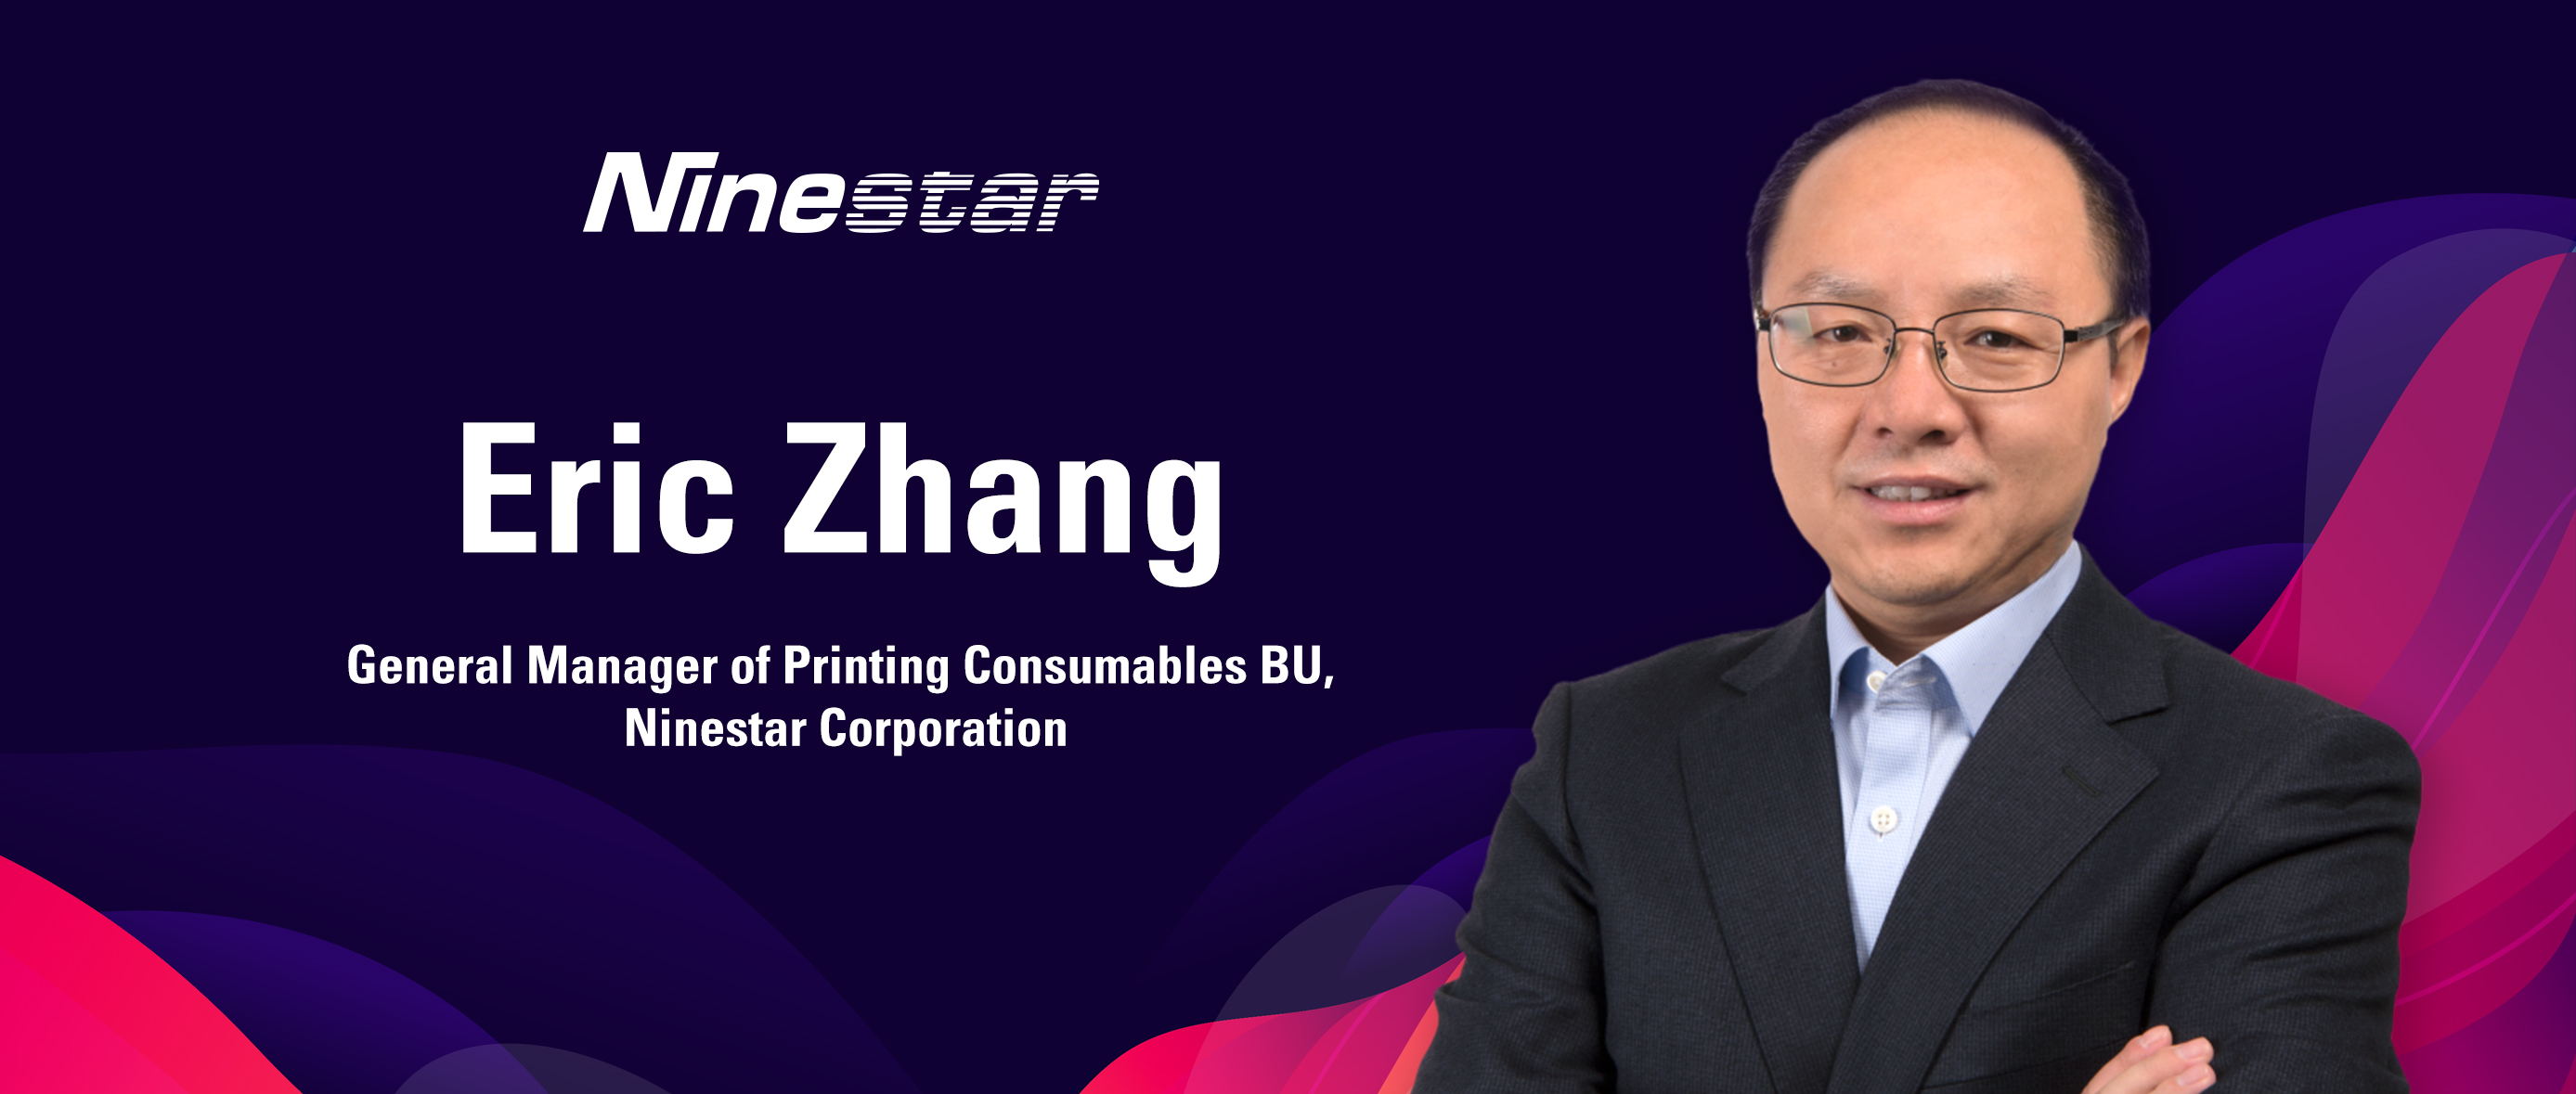 Eric Zhang Appointed to the Head of Ninestar’s Print Supply BU